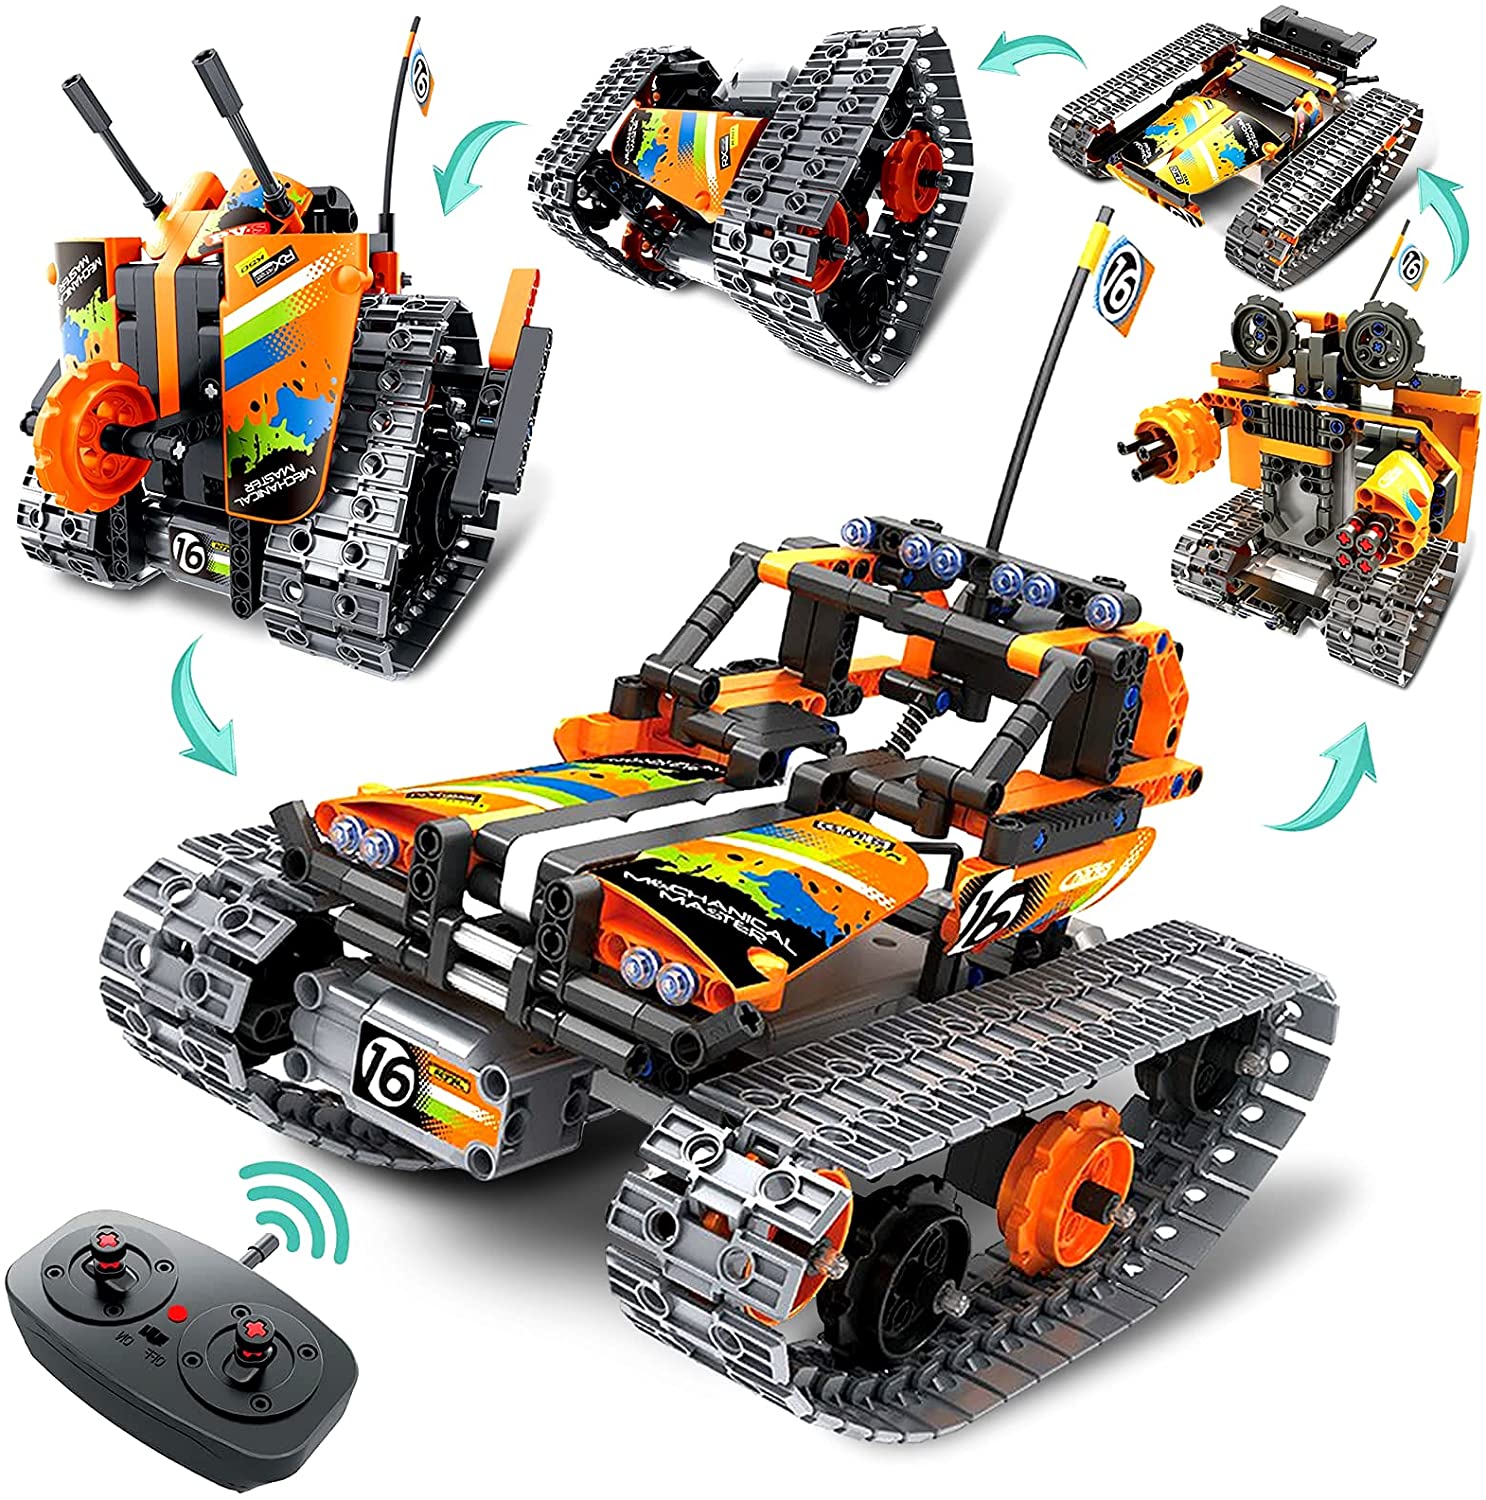 App & Remote Control Cars Building Toys Sets Coplus 5 in 1 STEM Robot Building Kit 398 Pcs Educational DIY Engineering Construction Blocks for Kids,Gift for 8 9 10 11 12 Years Old Boys & Girls 